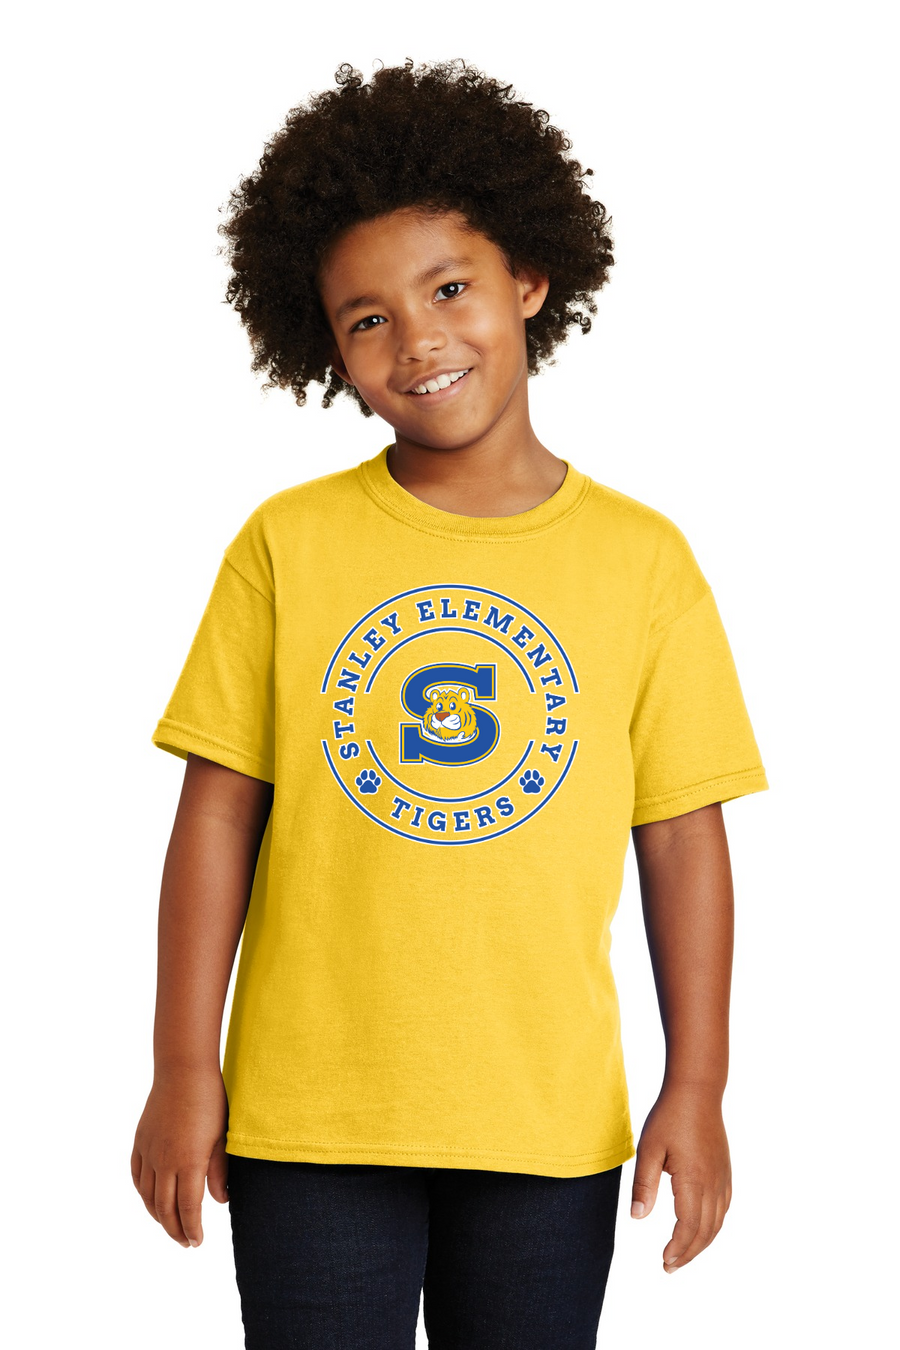 The Tiger Store - Stanley Elementary 2023/24 On-Demand-Unisex T-Shirt Circle Logo